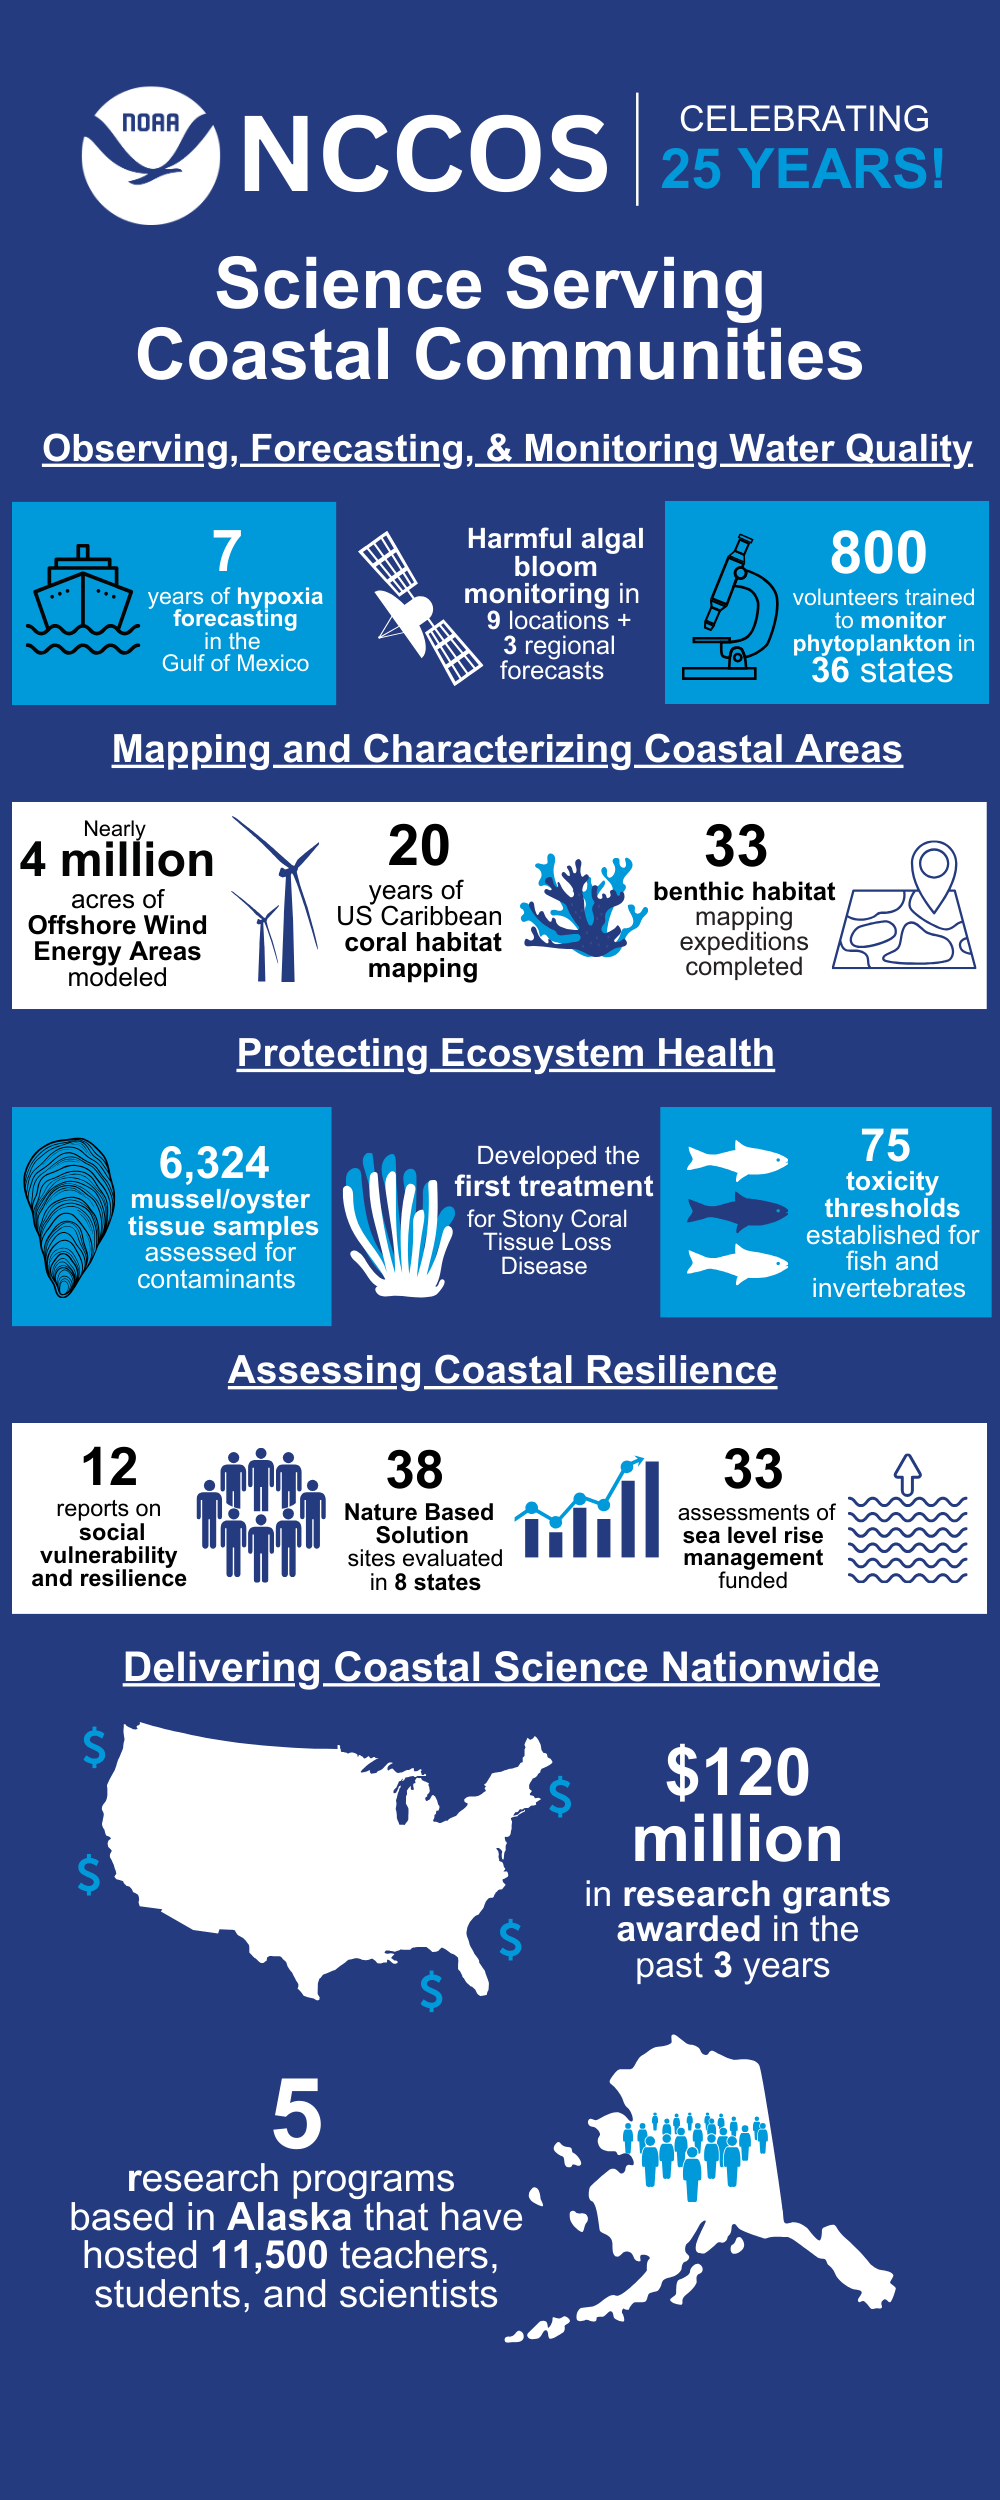 Join NCCOS in Celebrating 25 Years of Science Serving Coastal Communities (Video)